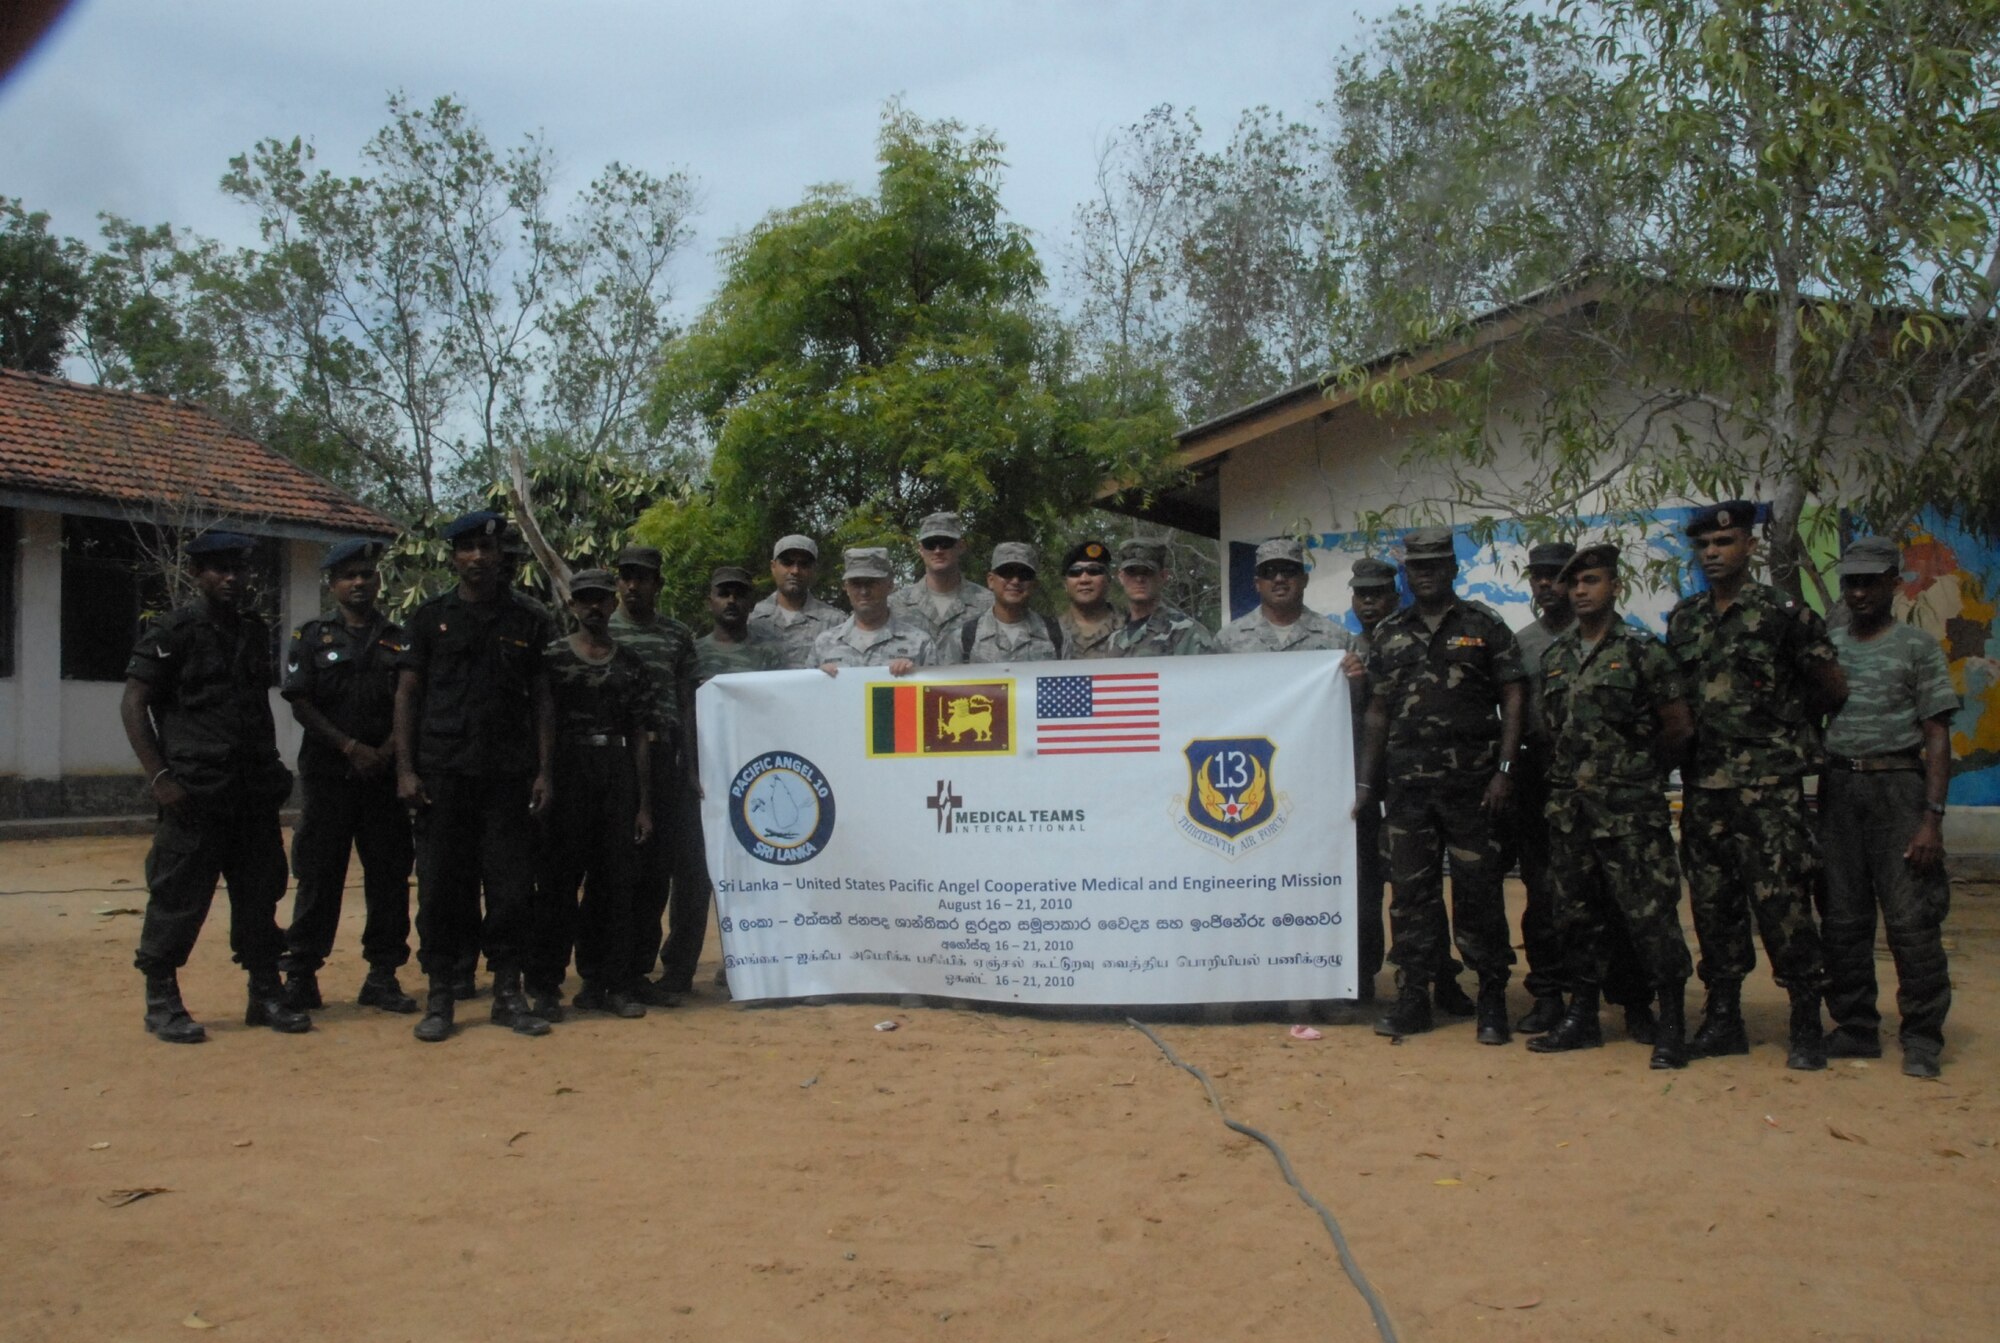 U.S. Air Force and Sri Lankan Army civil engineers meet during a school refurbishment project in Puttalam Township, Sri Lanka, as part of Pacific Angel-Sri Lanka on Aug. 16, 2010. Operation Pacific Angel is a joint and combined humanitarian assistance operation conducted in the Pacific area of responsibility to support U.S. Pacific Command's capacity-building efforts. This humanitarian and civic assistance program is aimed at improving military civic cooperation between the United States and countries throughout the Asia-Pacific region. Pacific Angel 2010 is scheduled through August 22. (U.S. Air Force photo/ Master Sgt. Mike Hammond)